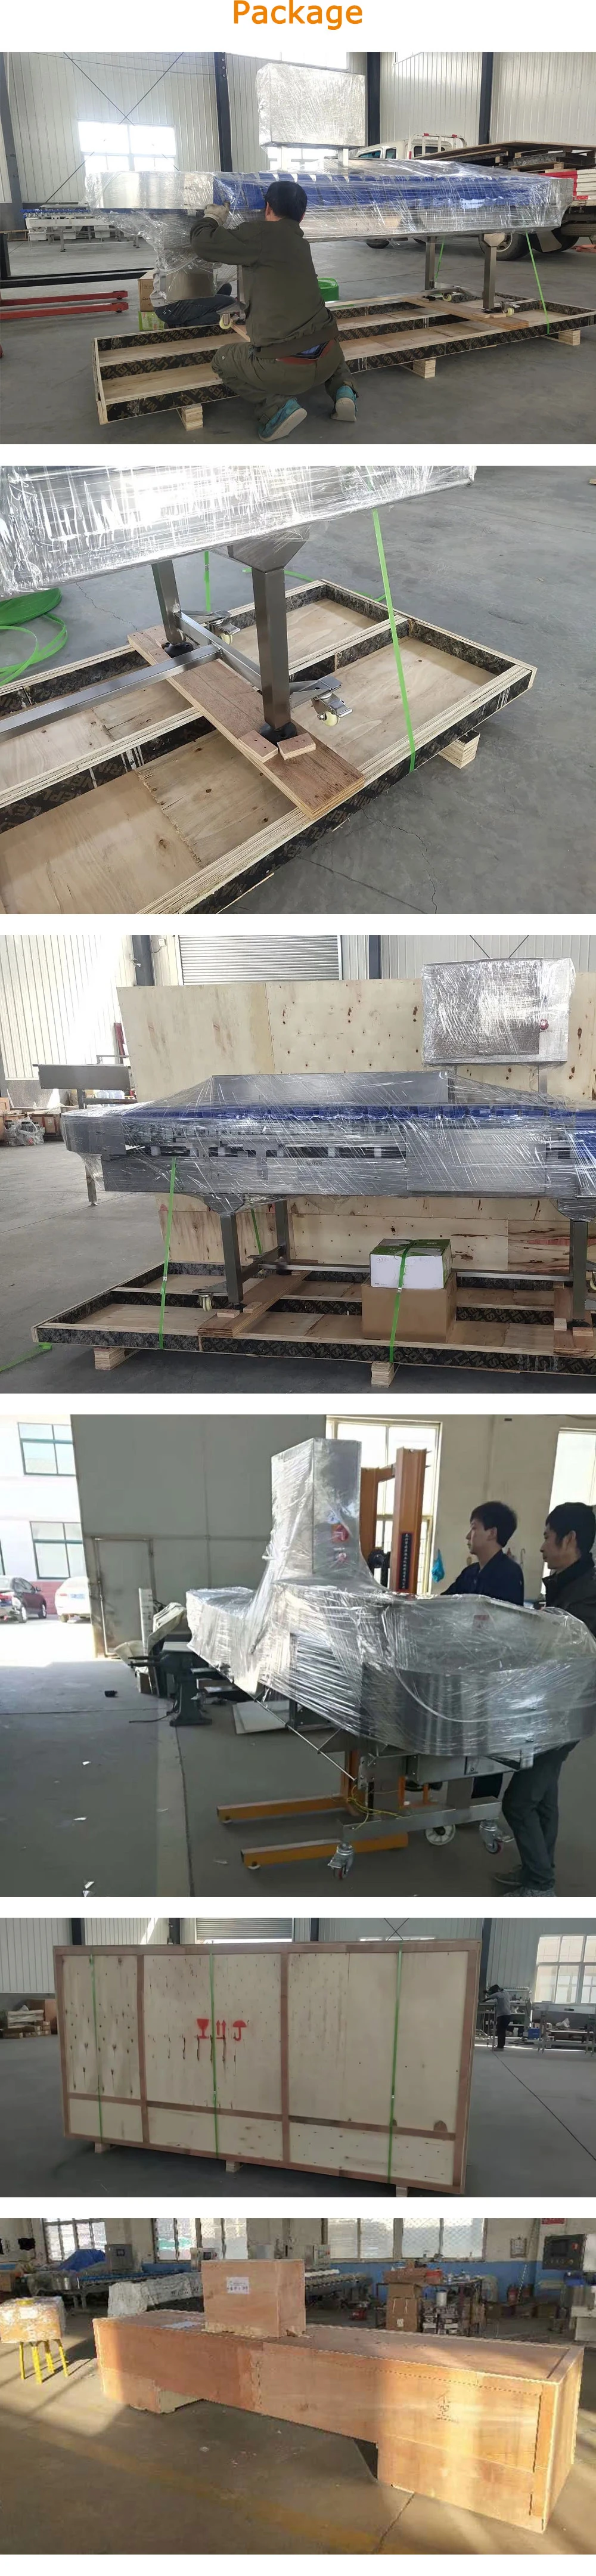 Ty-Jyh103p85-01-12 Full Stainless Steel Frame Belt Conveying Weight Checking Sorting Machine